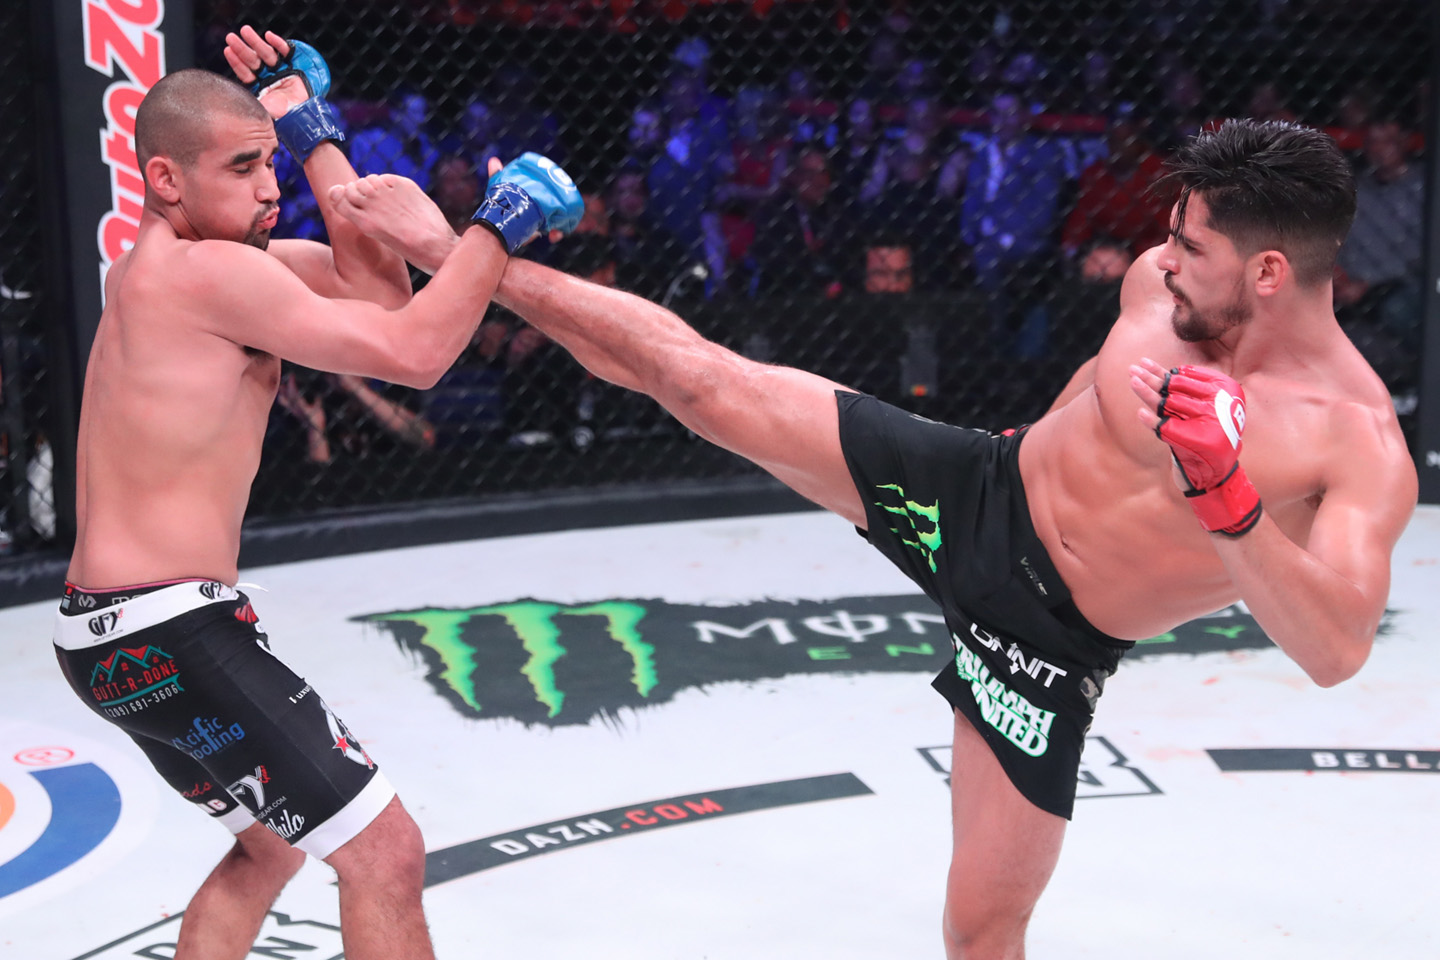 Monster Energy's Gaston Bolanos knocks out Ysidro Gutierrez in the featherweight bout at Bellator 206